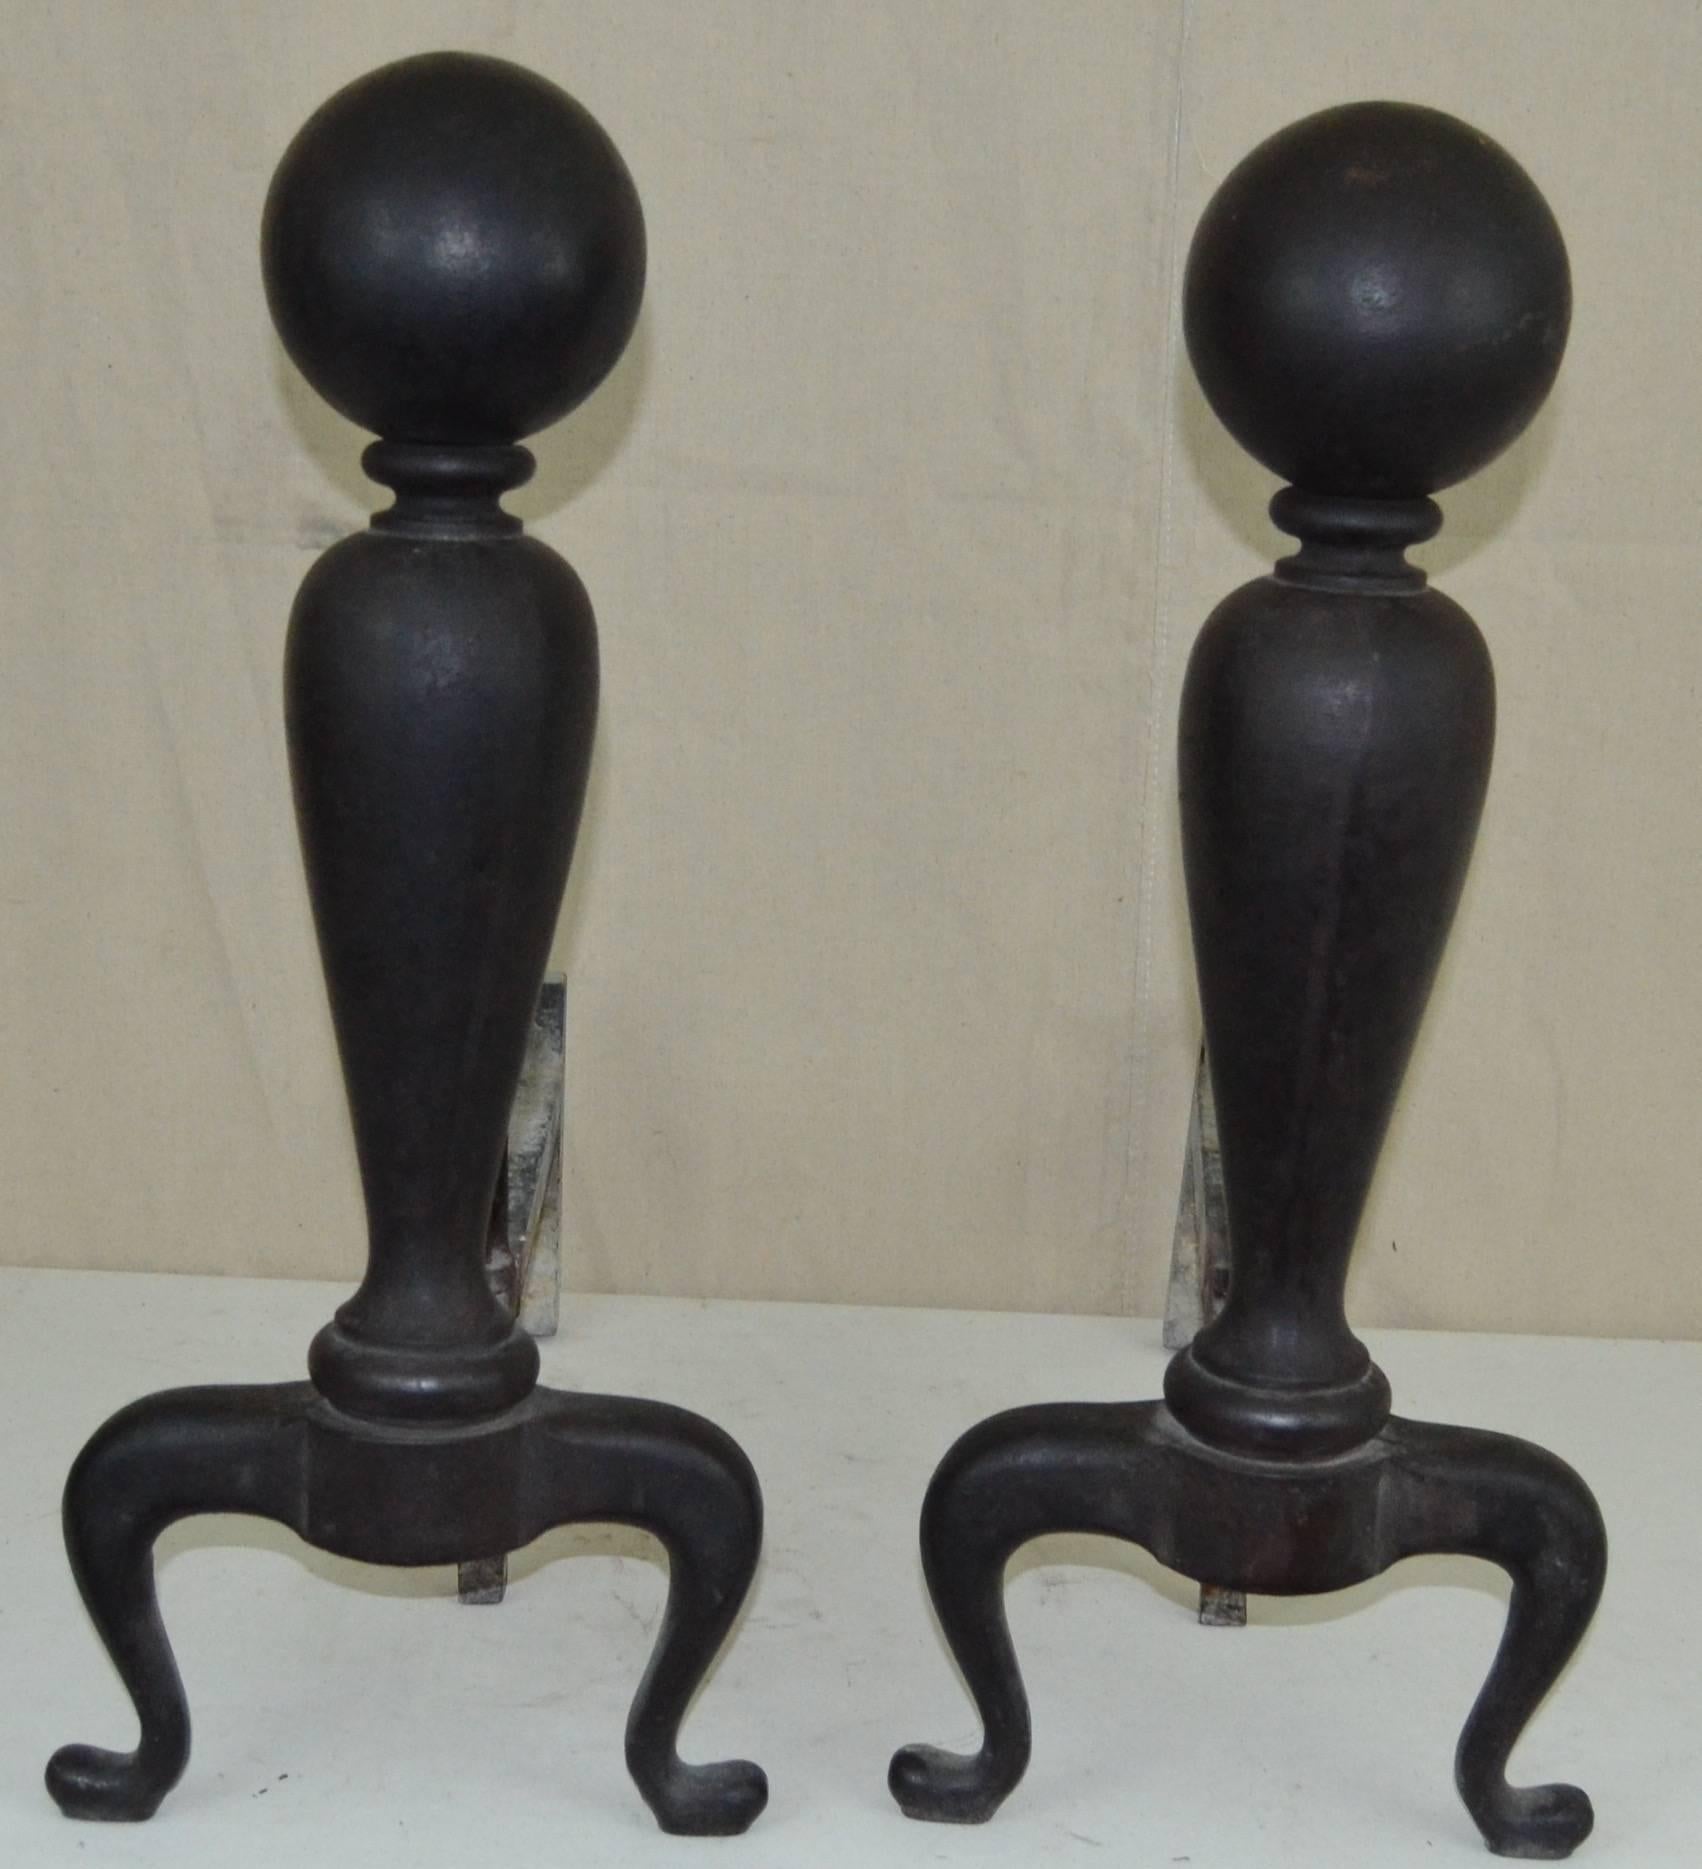 A fantastic set of cast iron andirons, large and very graphic.